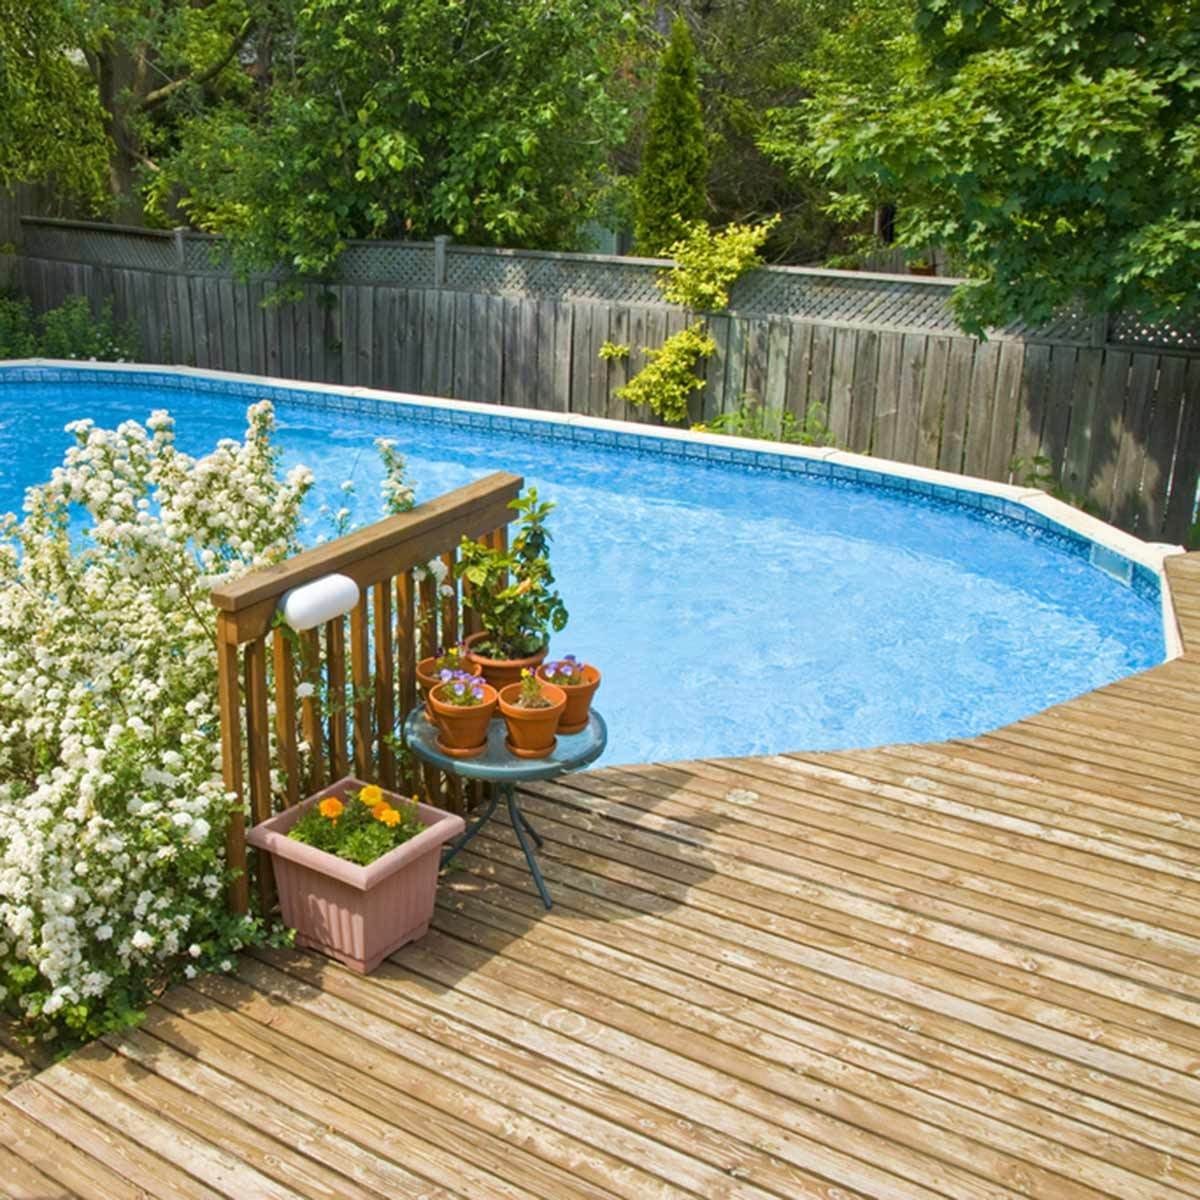 10 Best Backyard Pool Ideas And Designs Images The Family Handyman